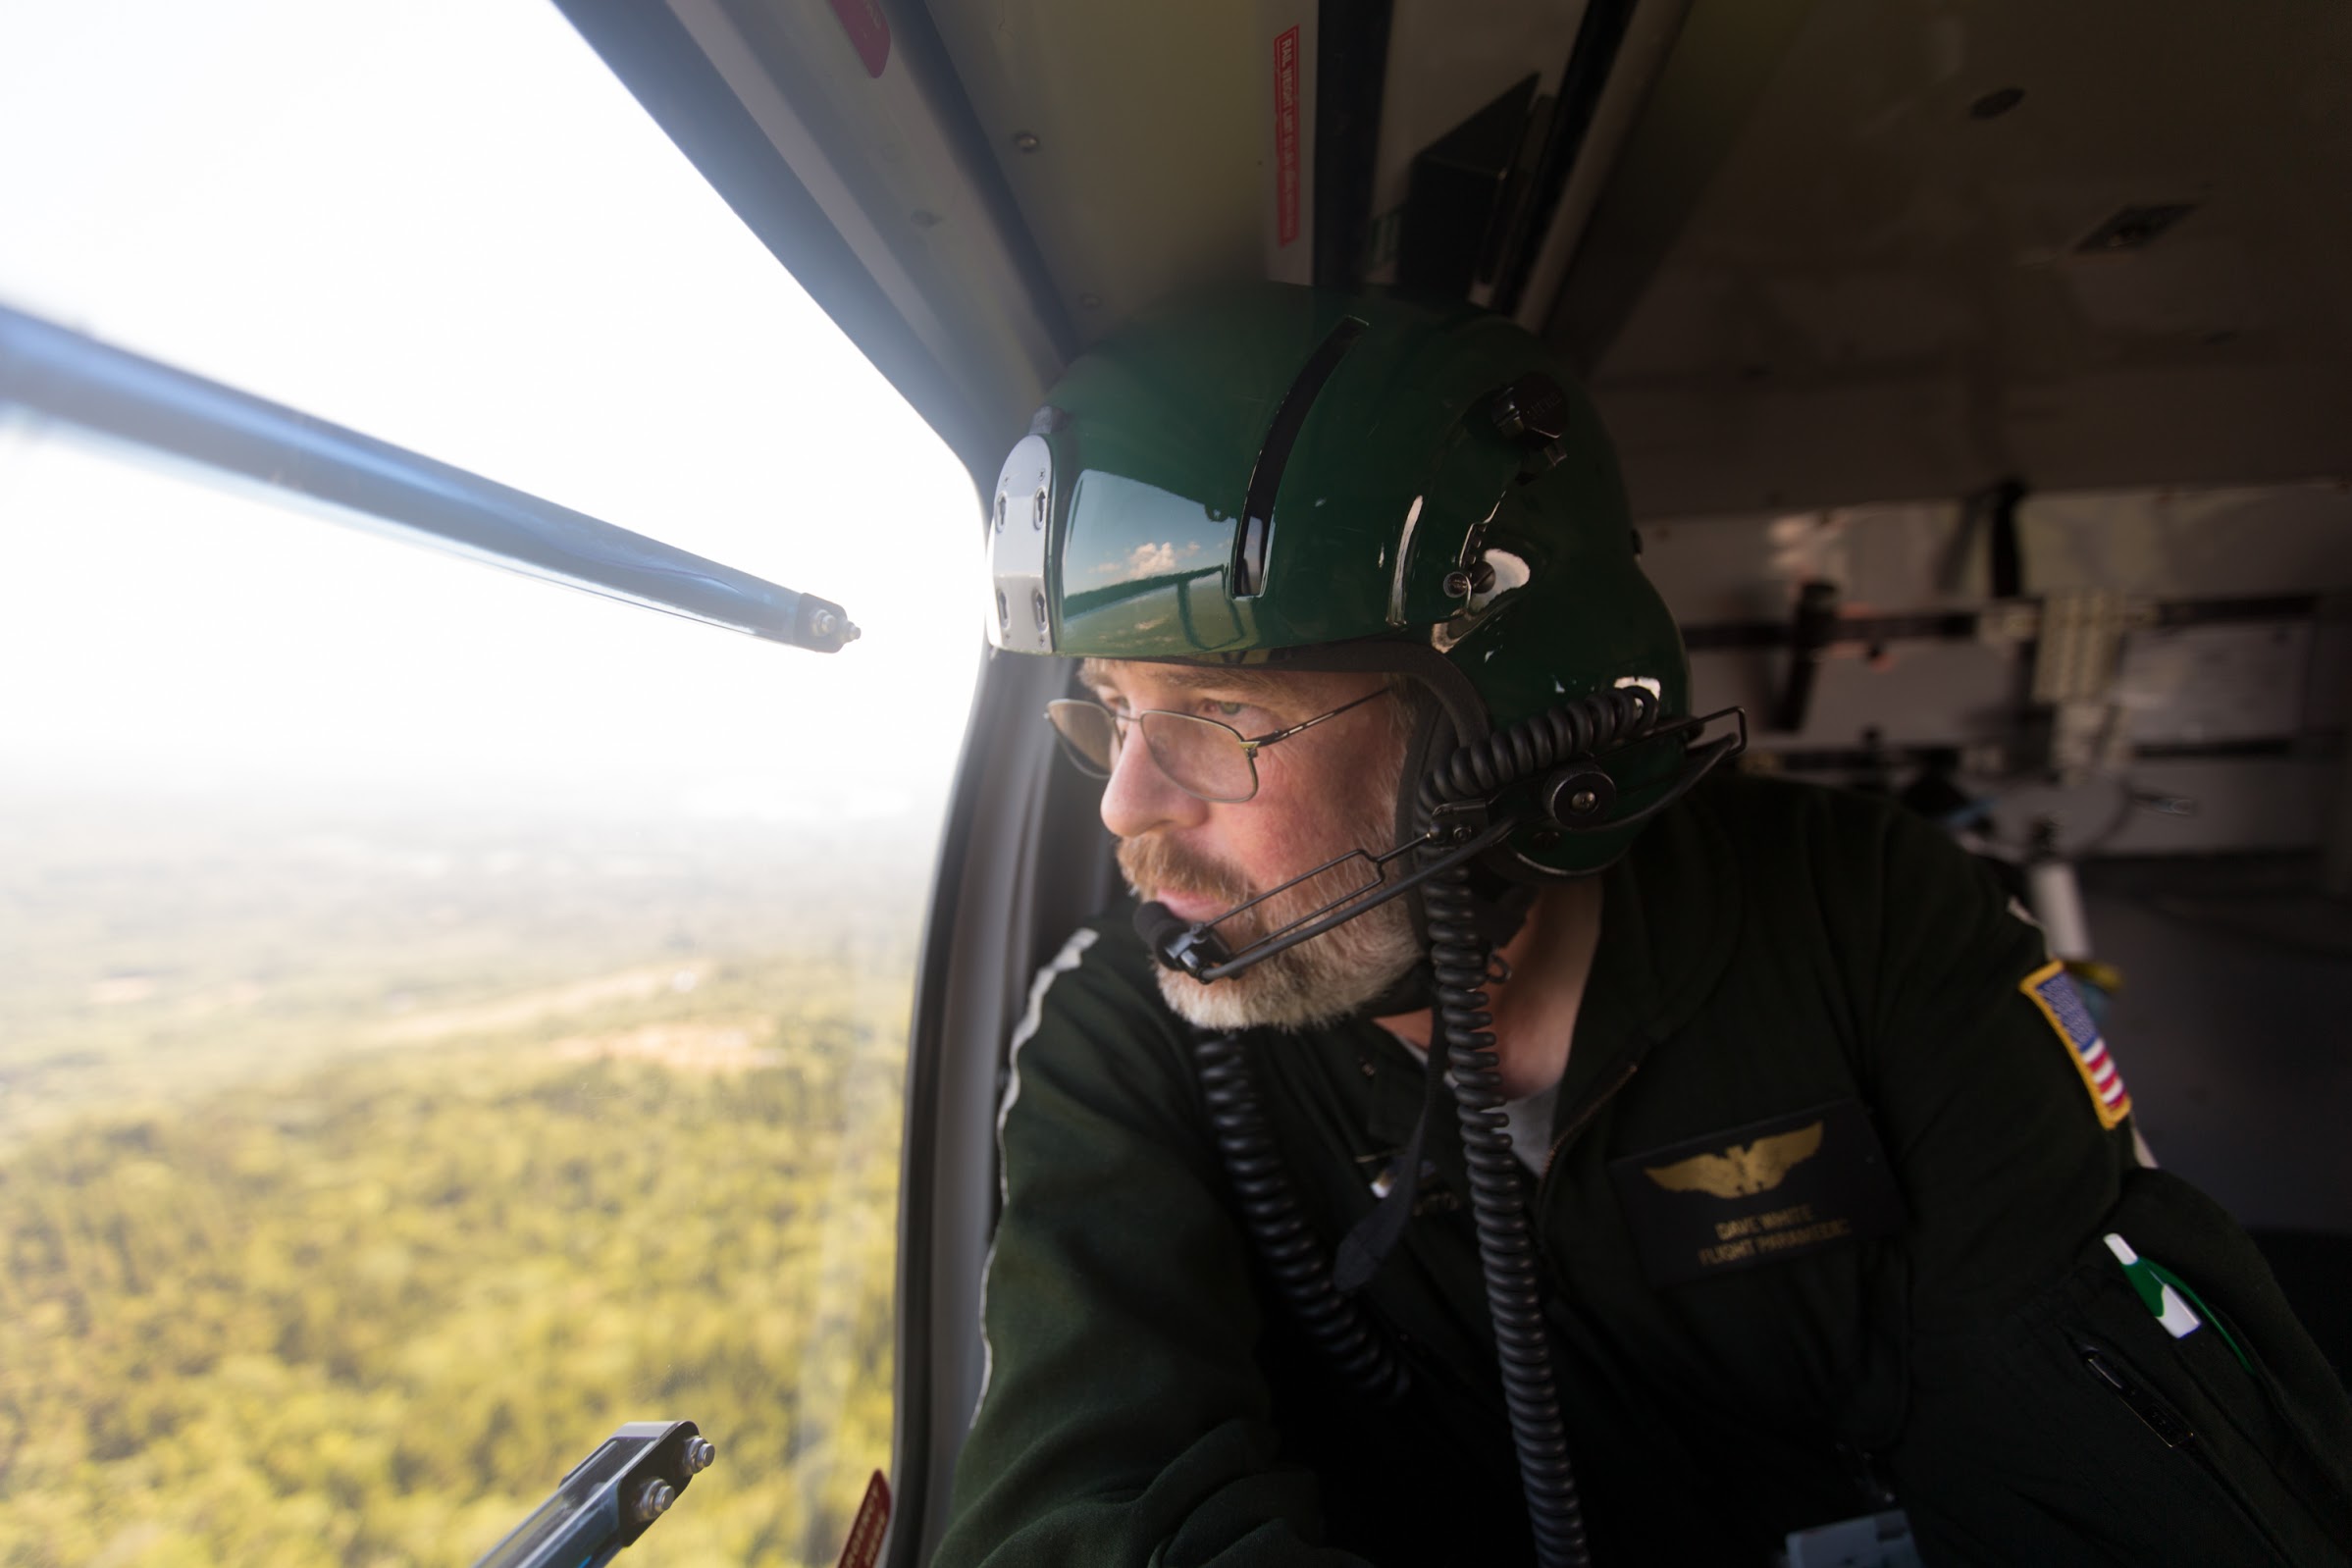 Man with pilot helmet and aviator suit looks out of a helicopter window